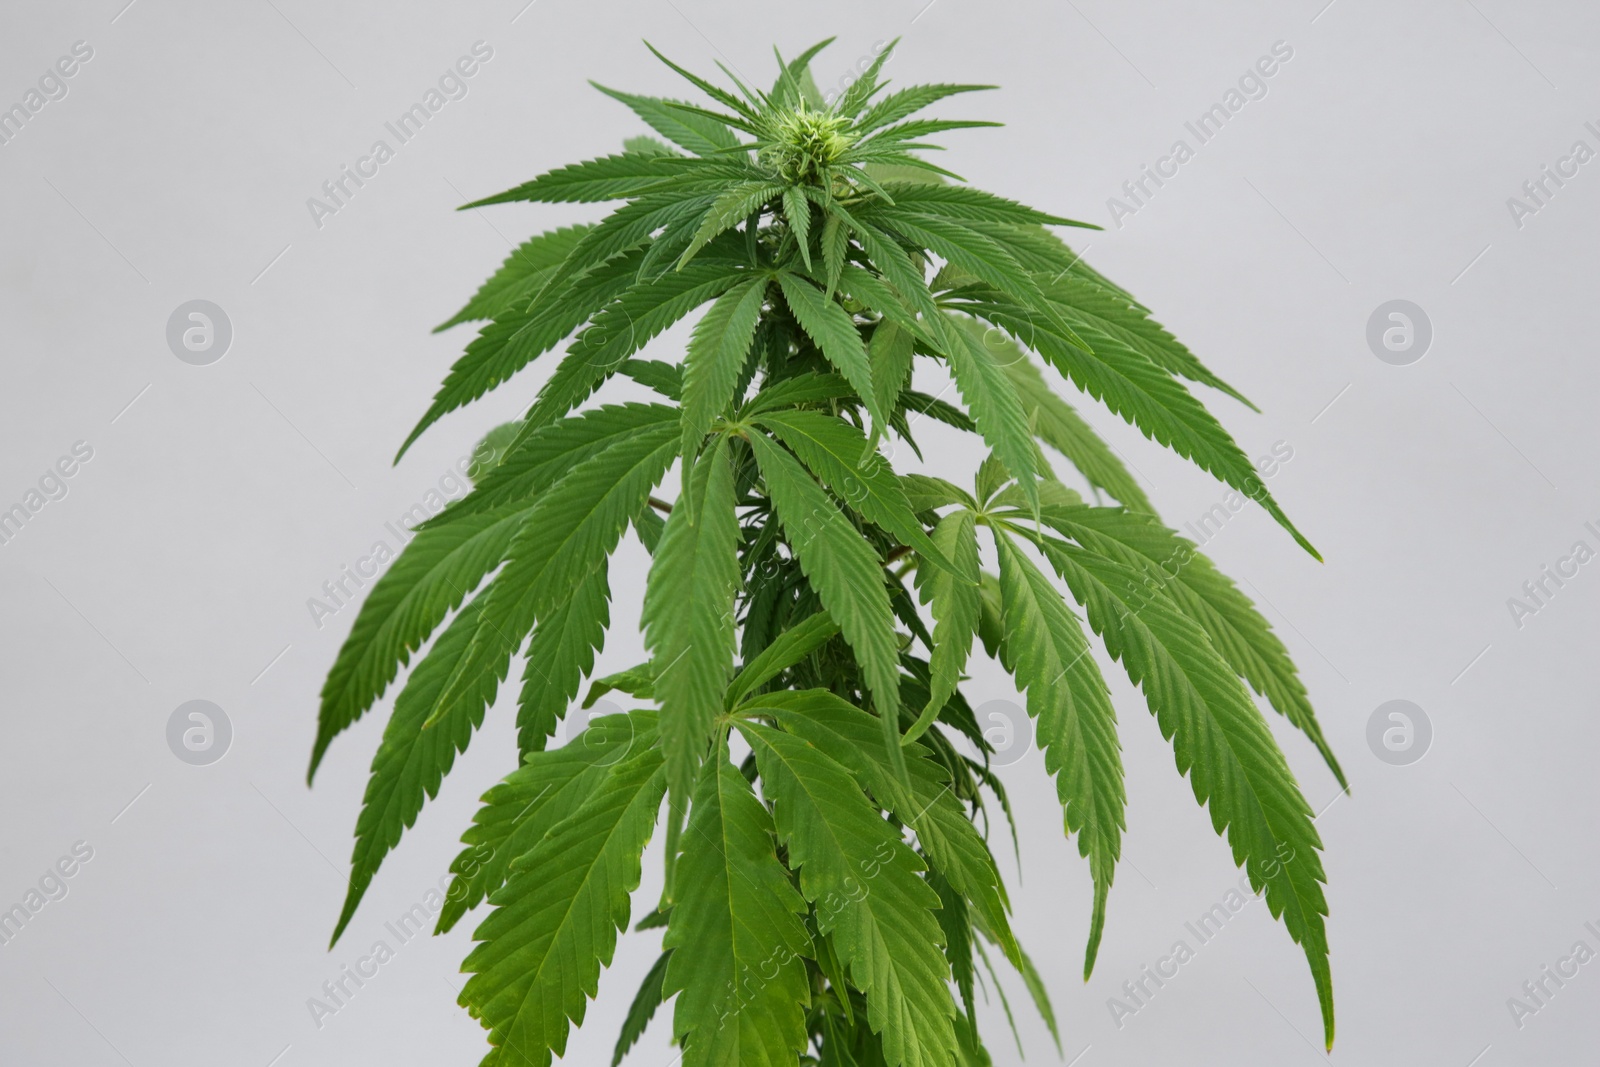 Photo of Green hemp leaves on white background. Cannabis plant